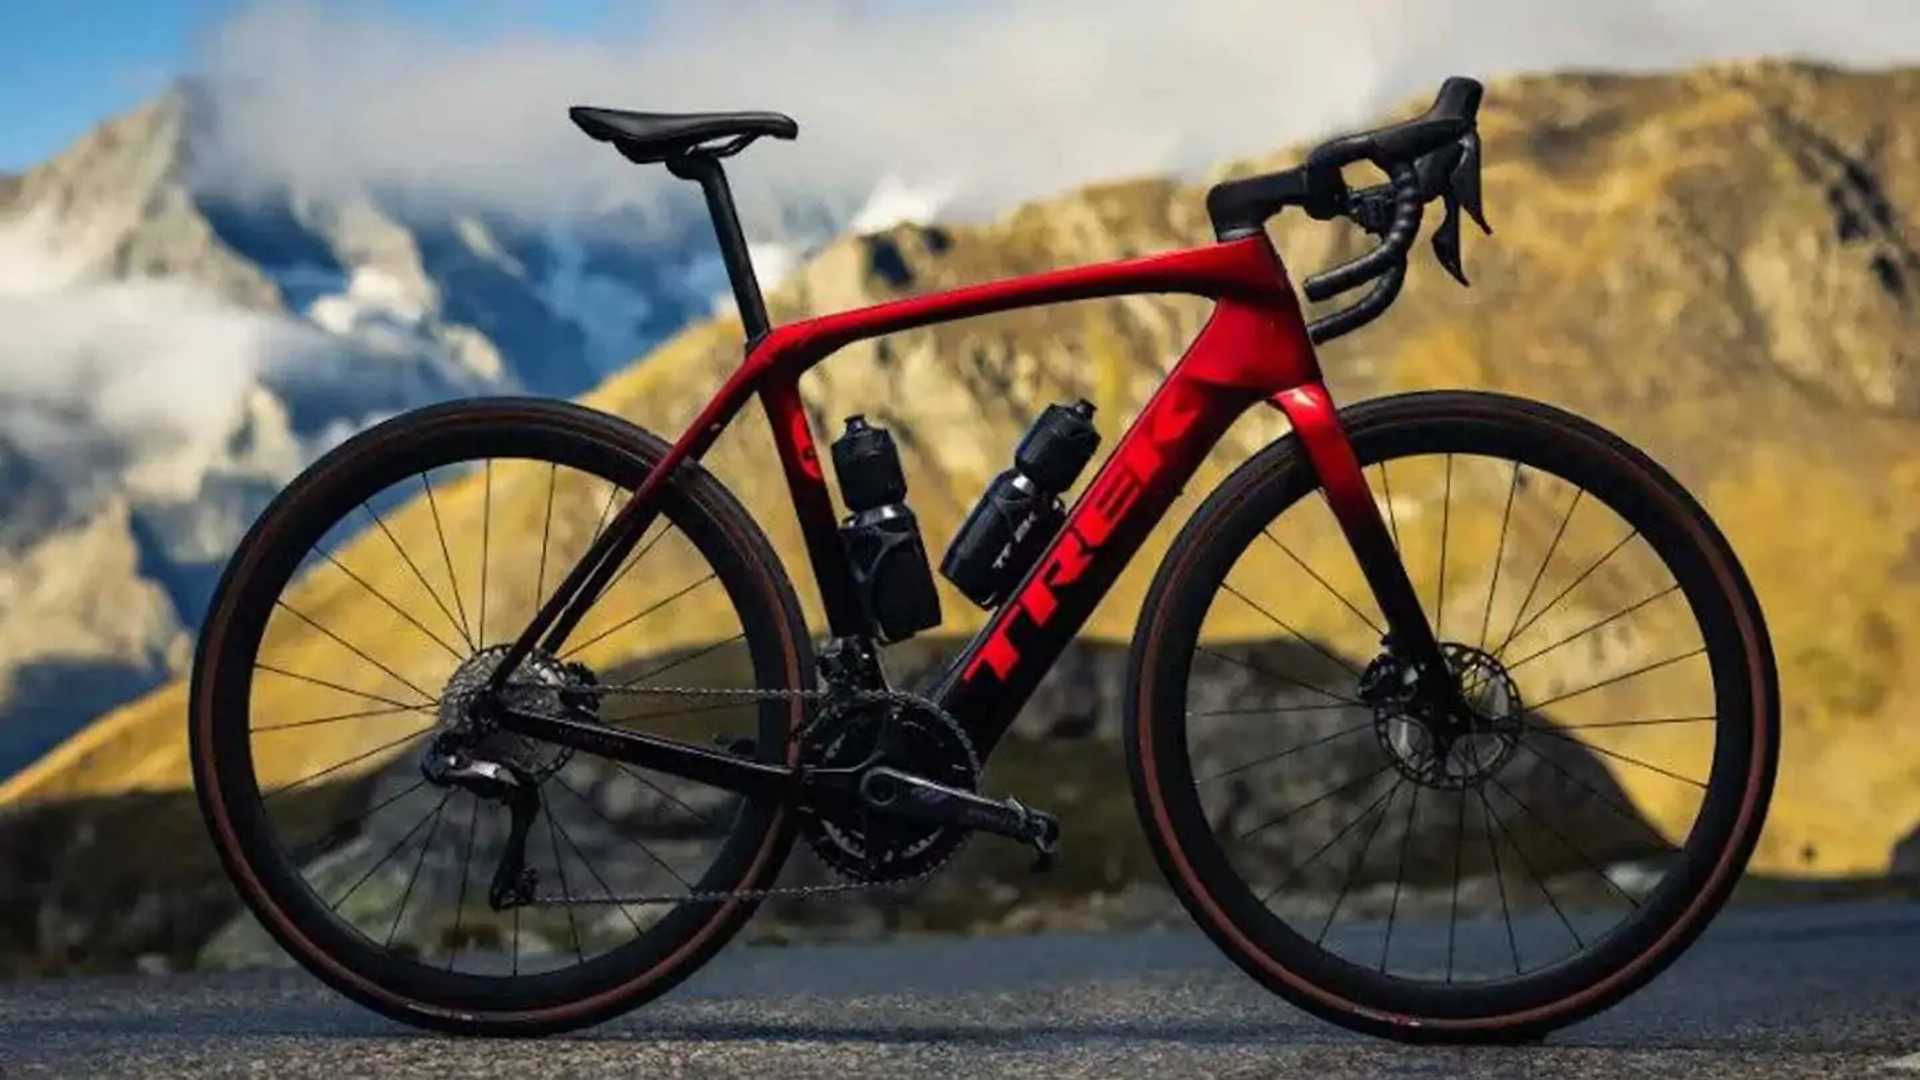 good deals to he had on used e-bikes through trek’s red barn refresh